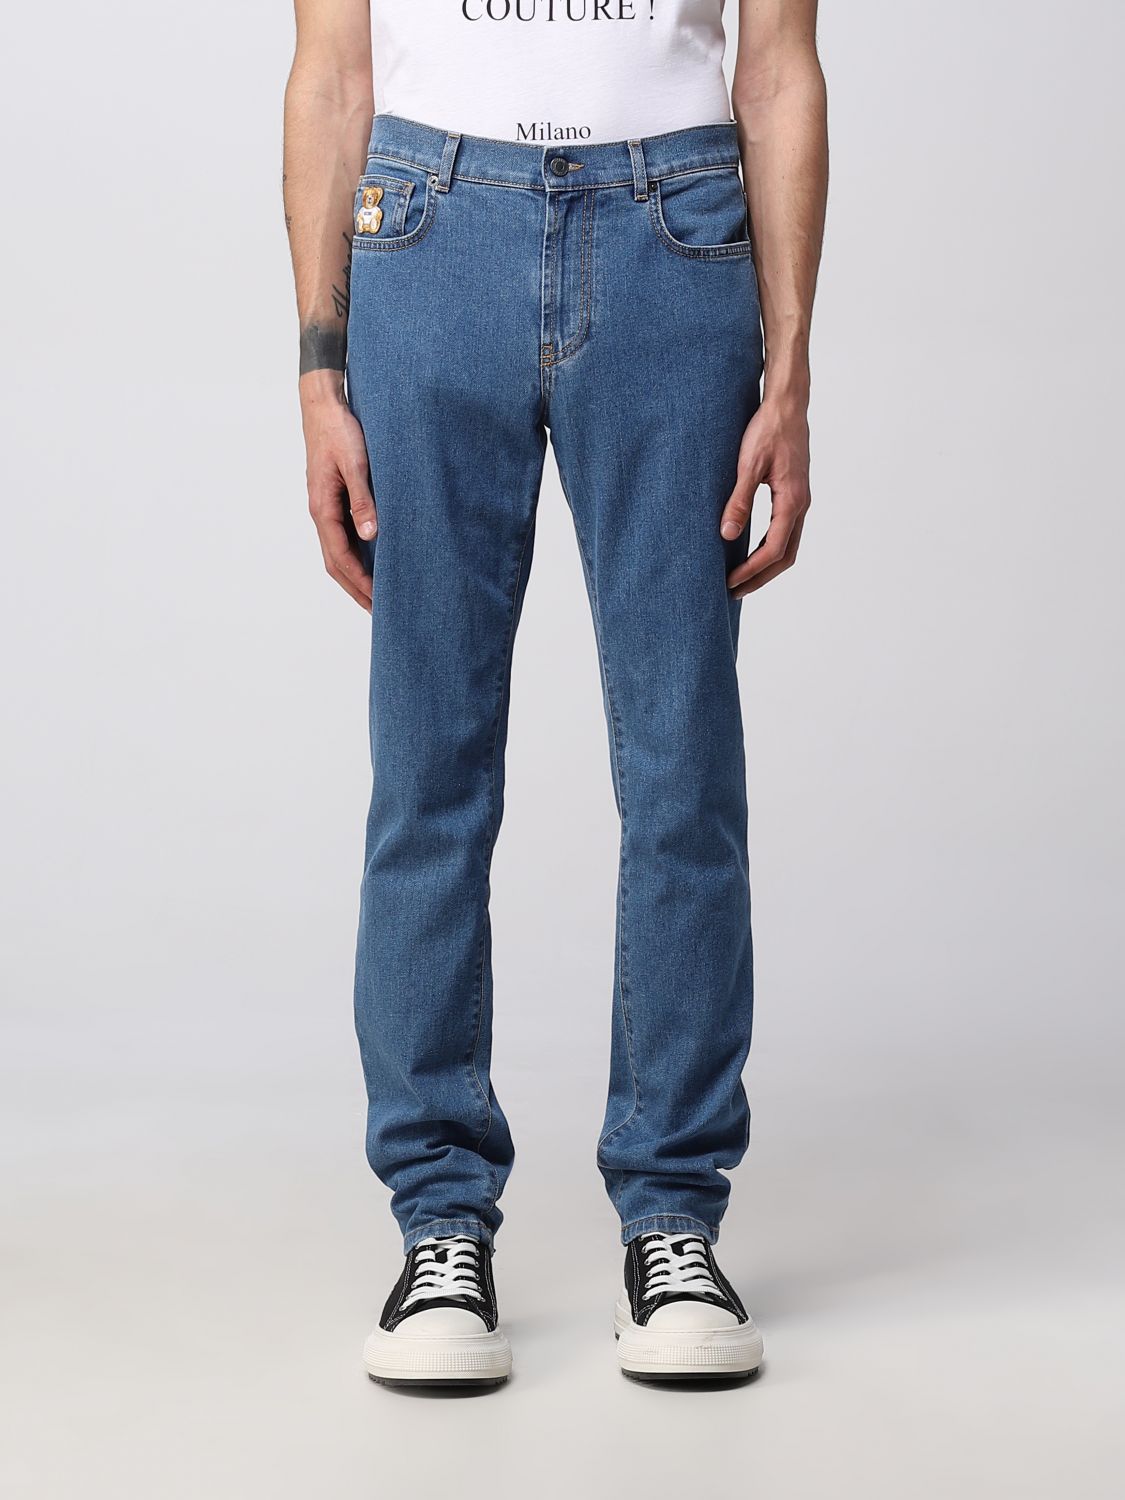 MOSCHINO jeans for man Denim | Moschino jeans online on GIGLIO.COM